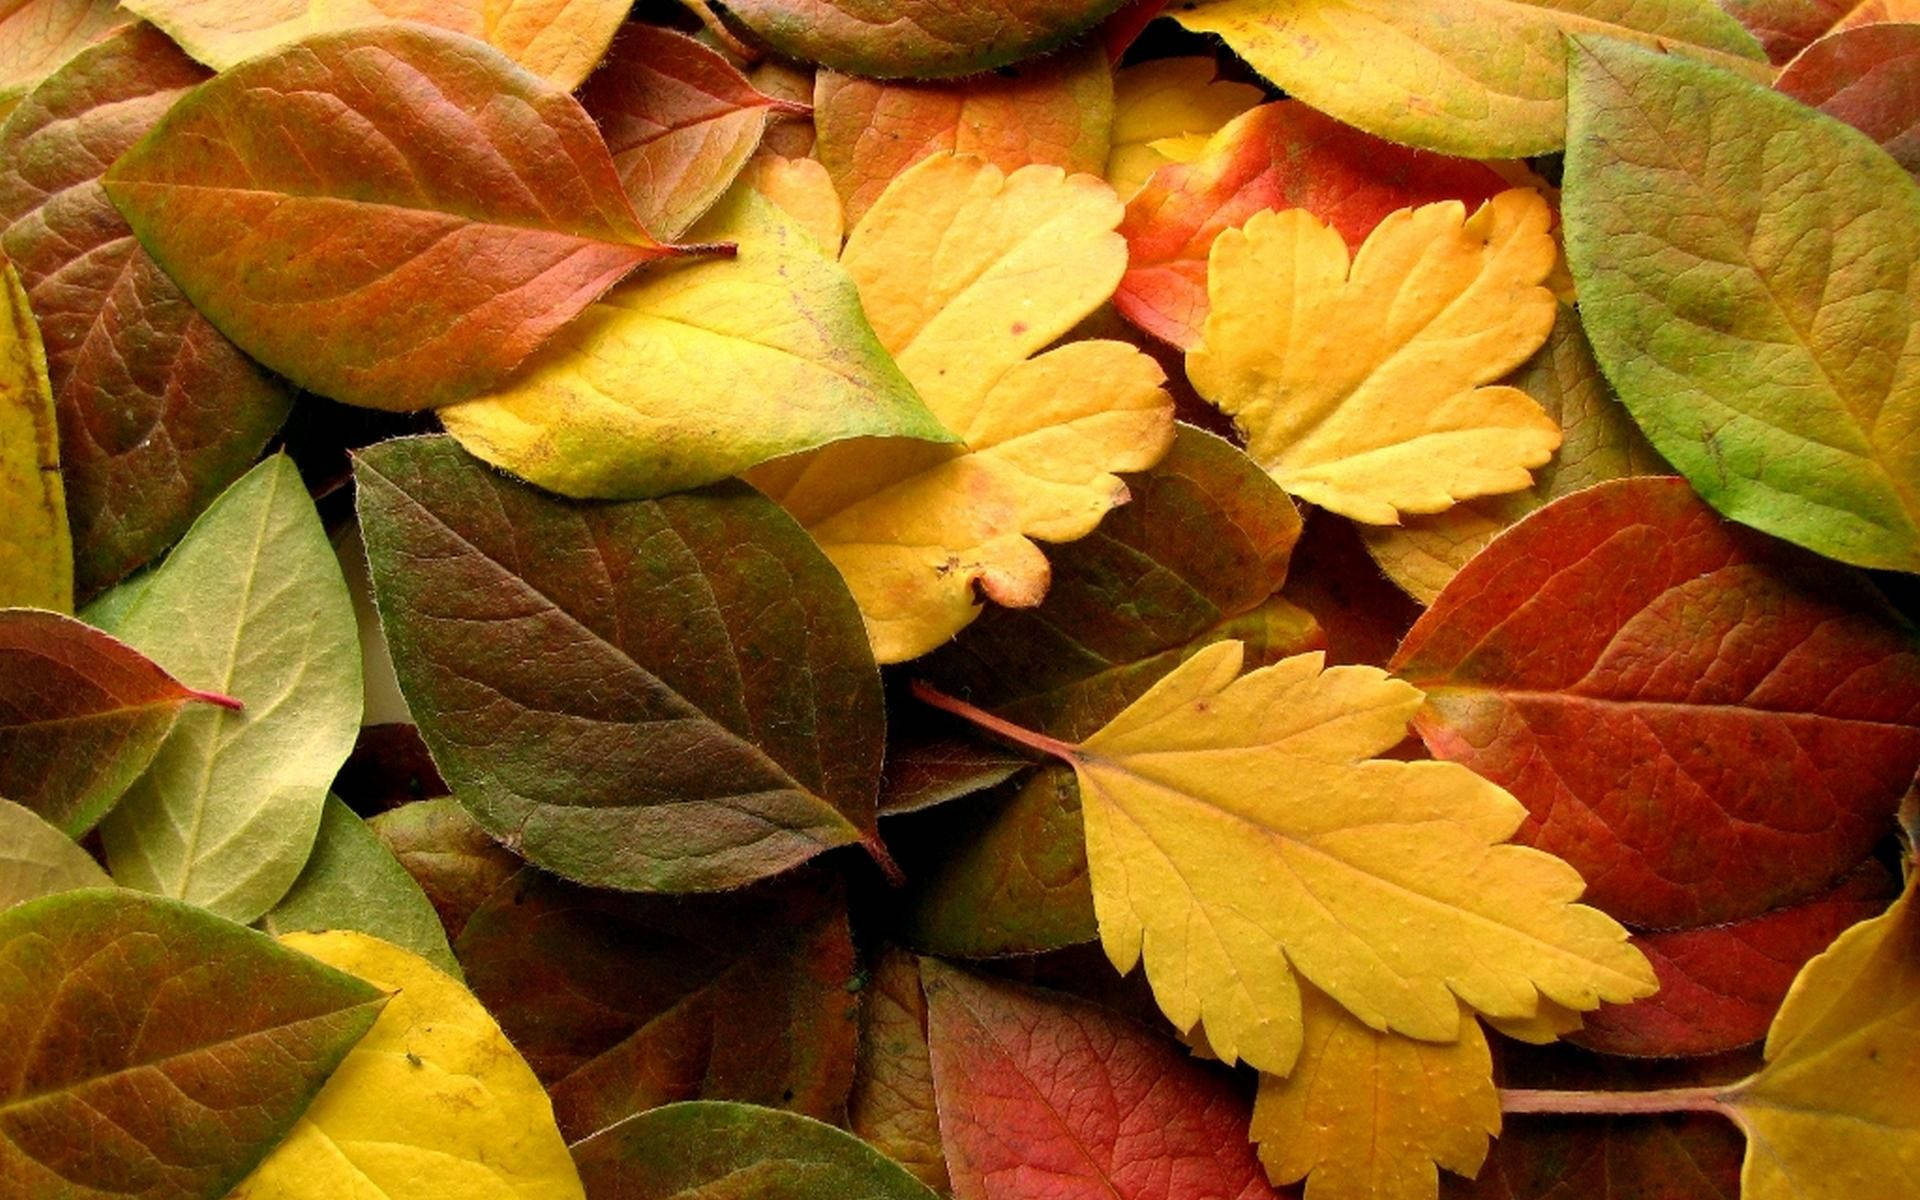 Orange, green and red Beech, Oaks, Dogwoods And Hickories  leaves on ground during autumn season.